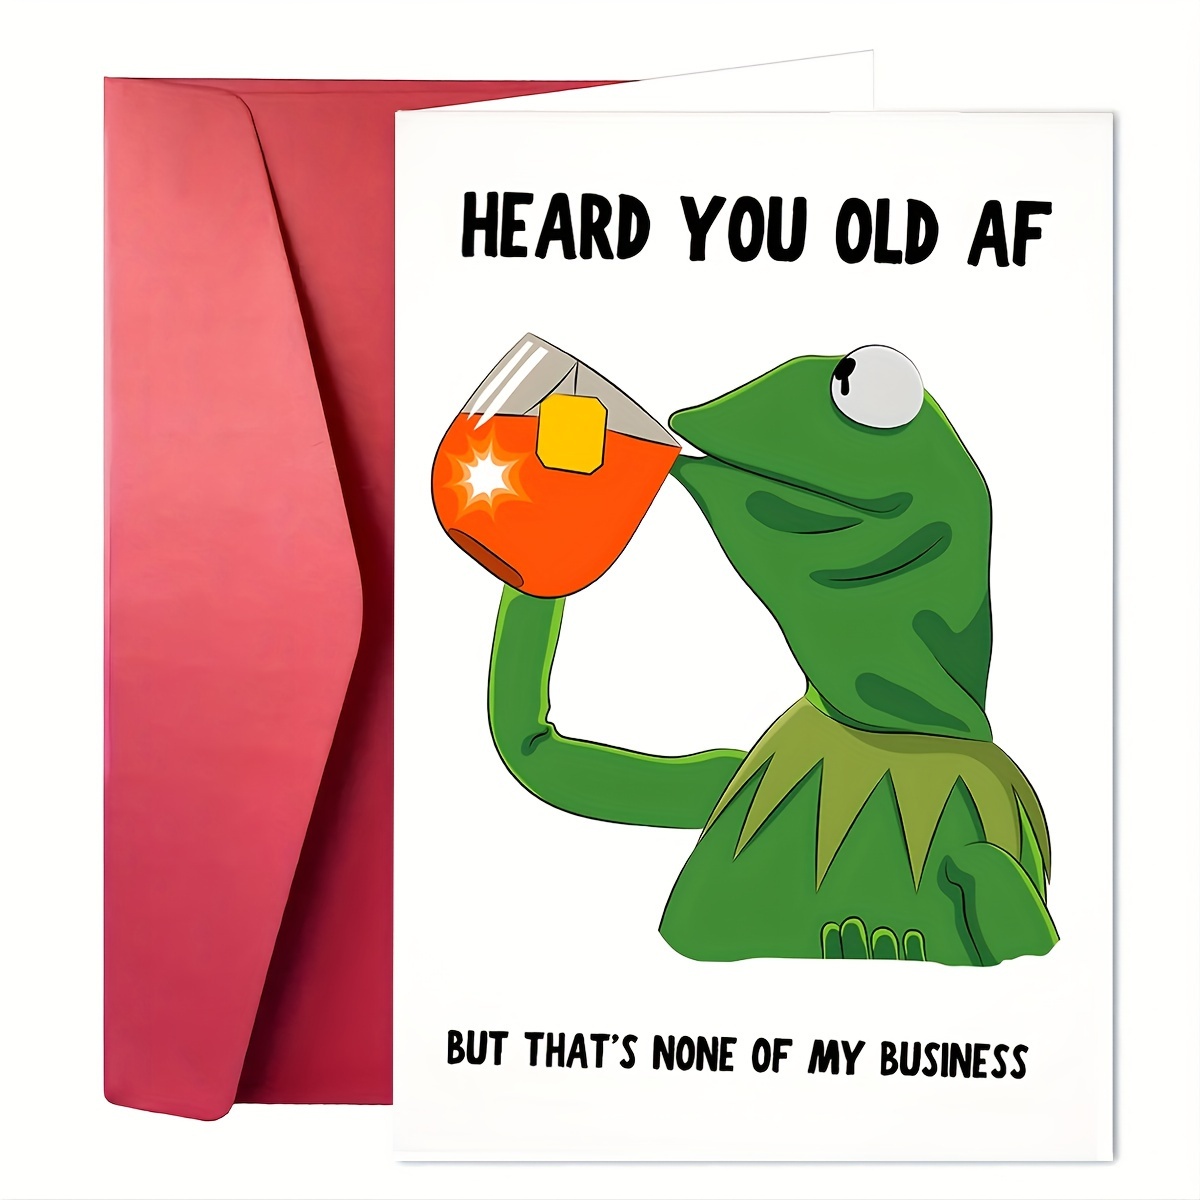  Sleazy Greetings Funny Birthday Card Meme For Him Her